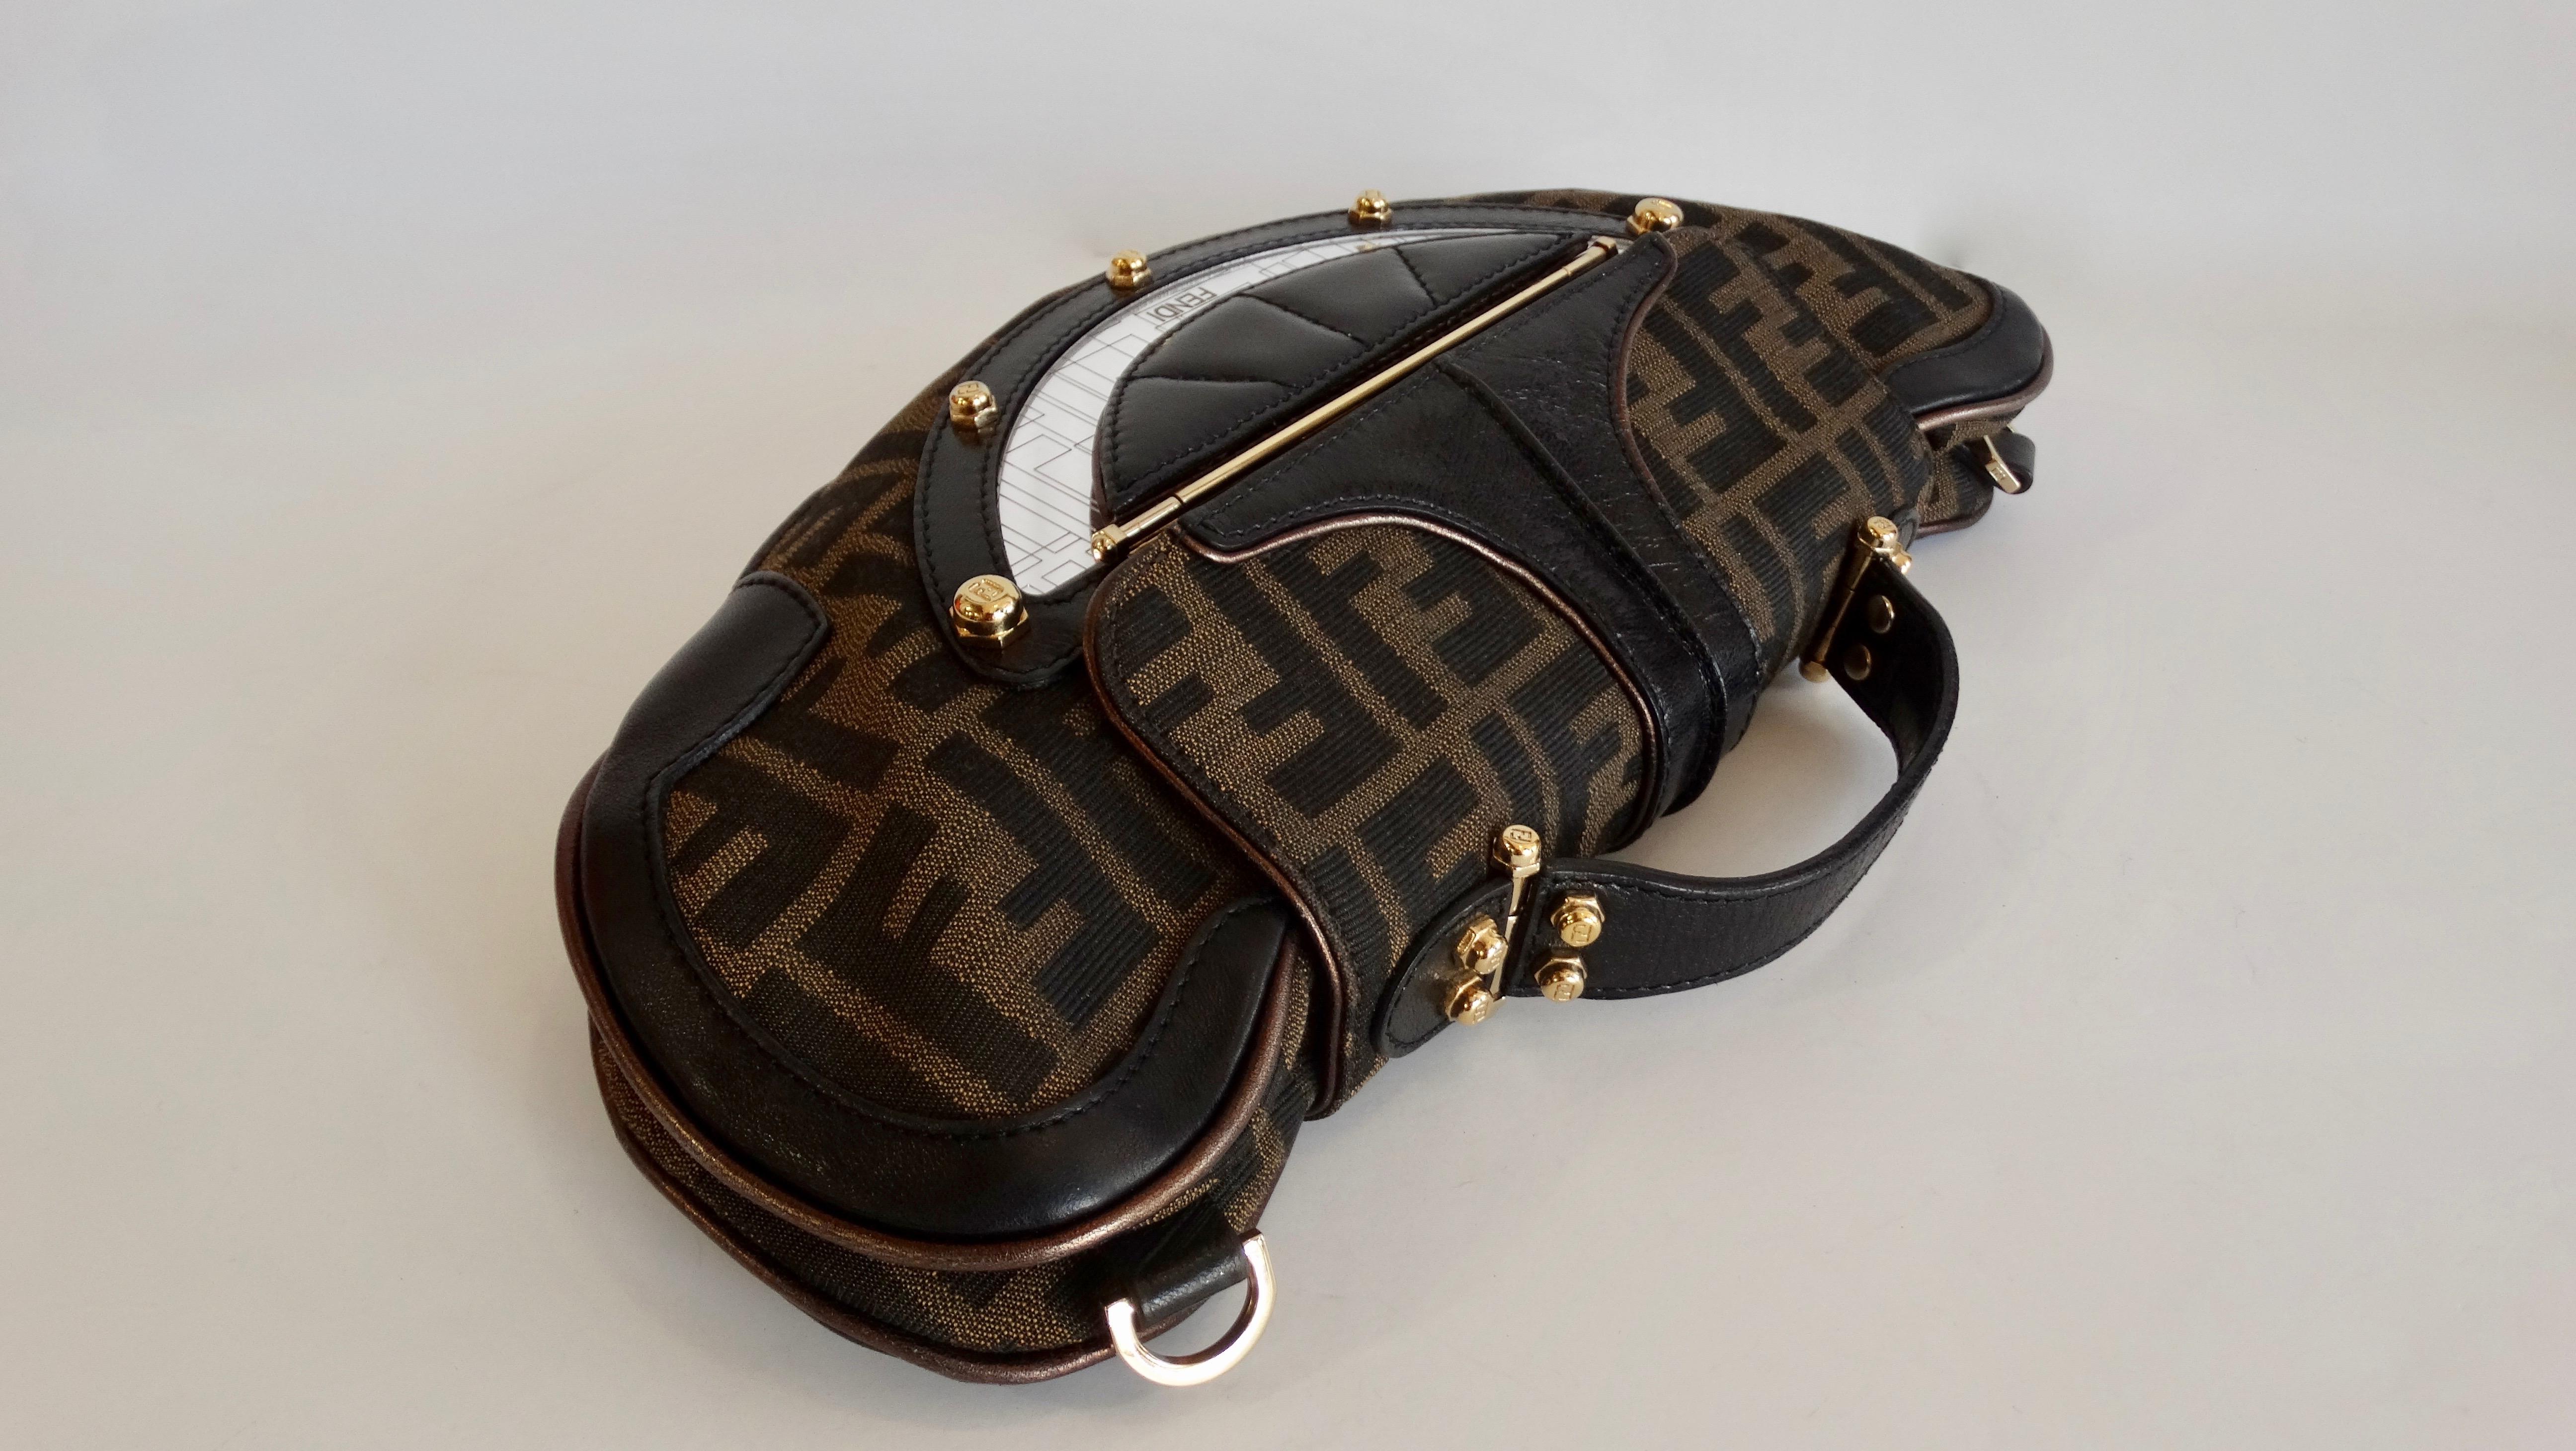 A good Fendi monogram bag is a necessity! Circa 2000s, this rare Fendi canvas purse features their iconic monogram, dark and metallic brown leather detailing, and gold hardware. Includes a monogram exterior lipstick mirror and a removable flat